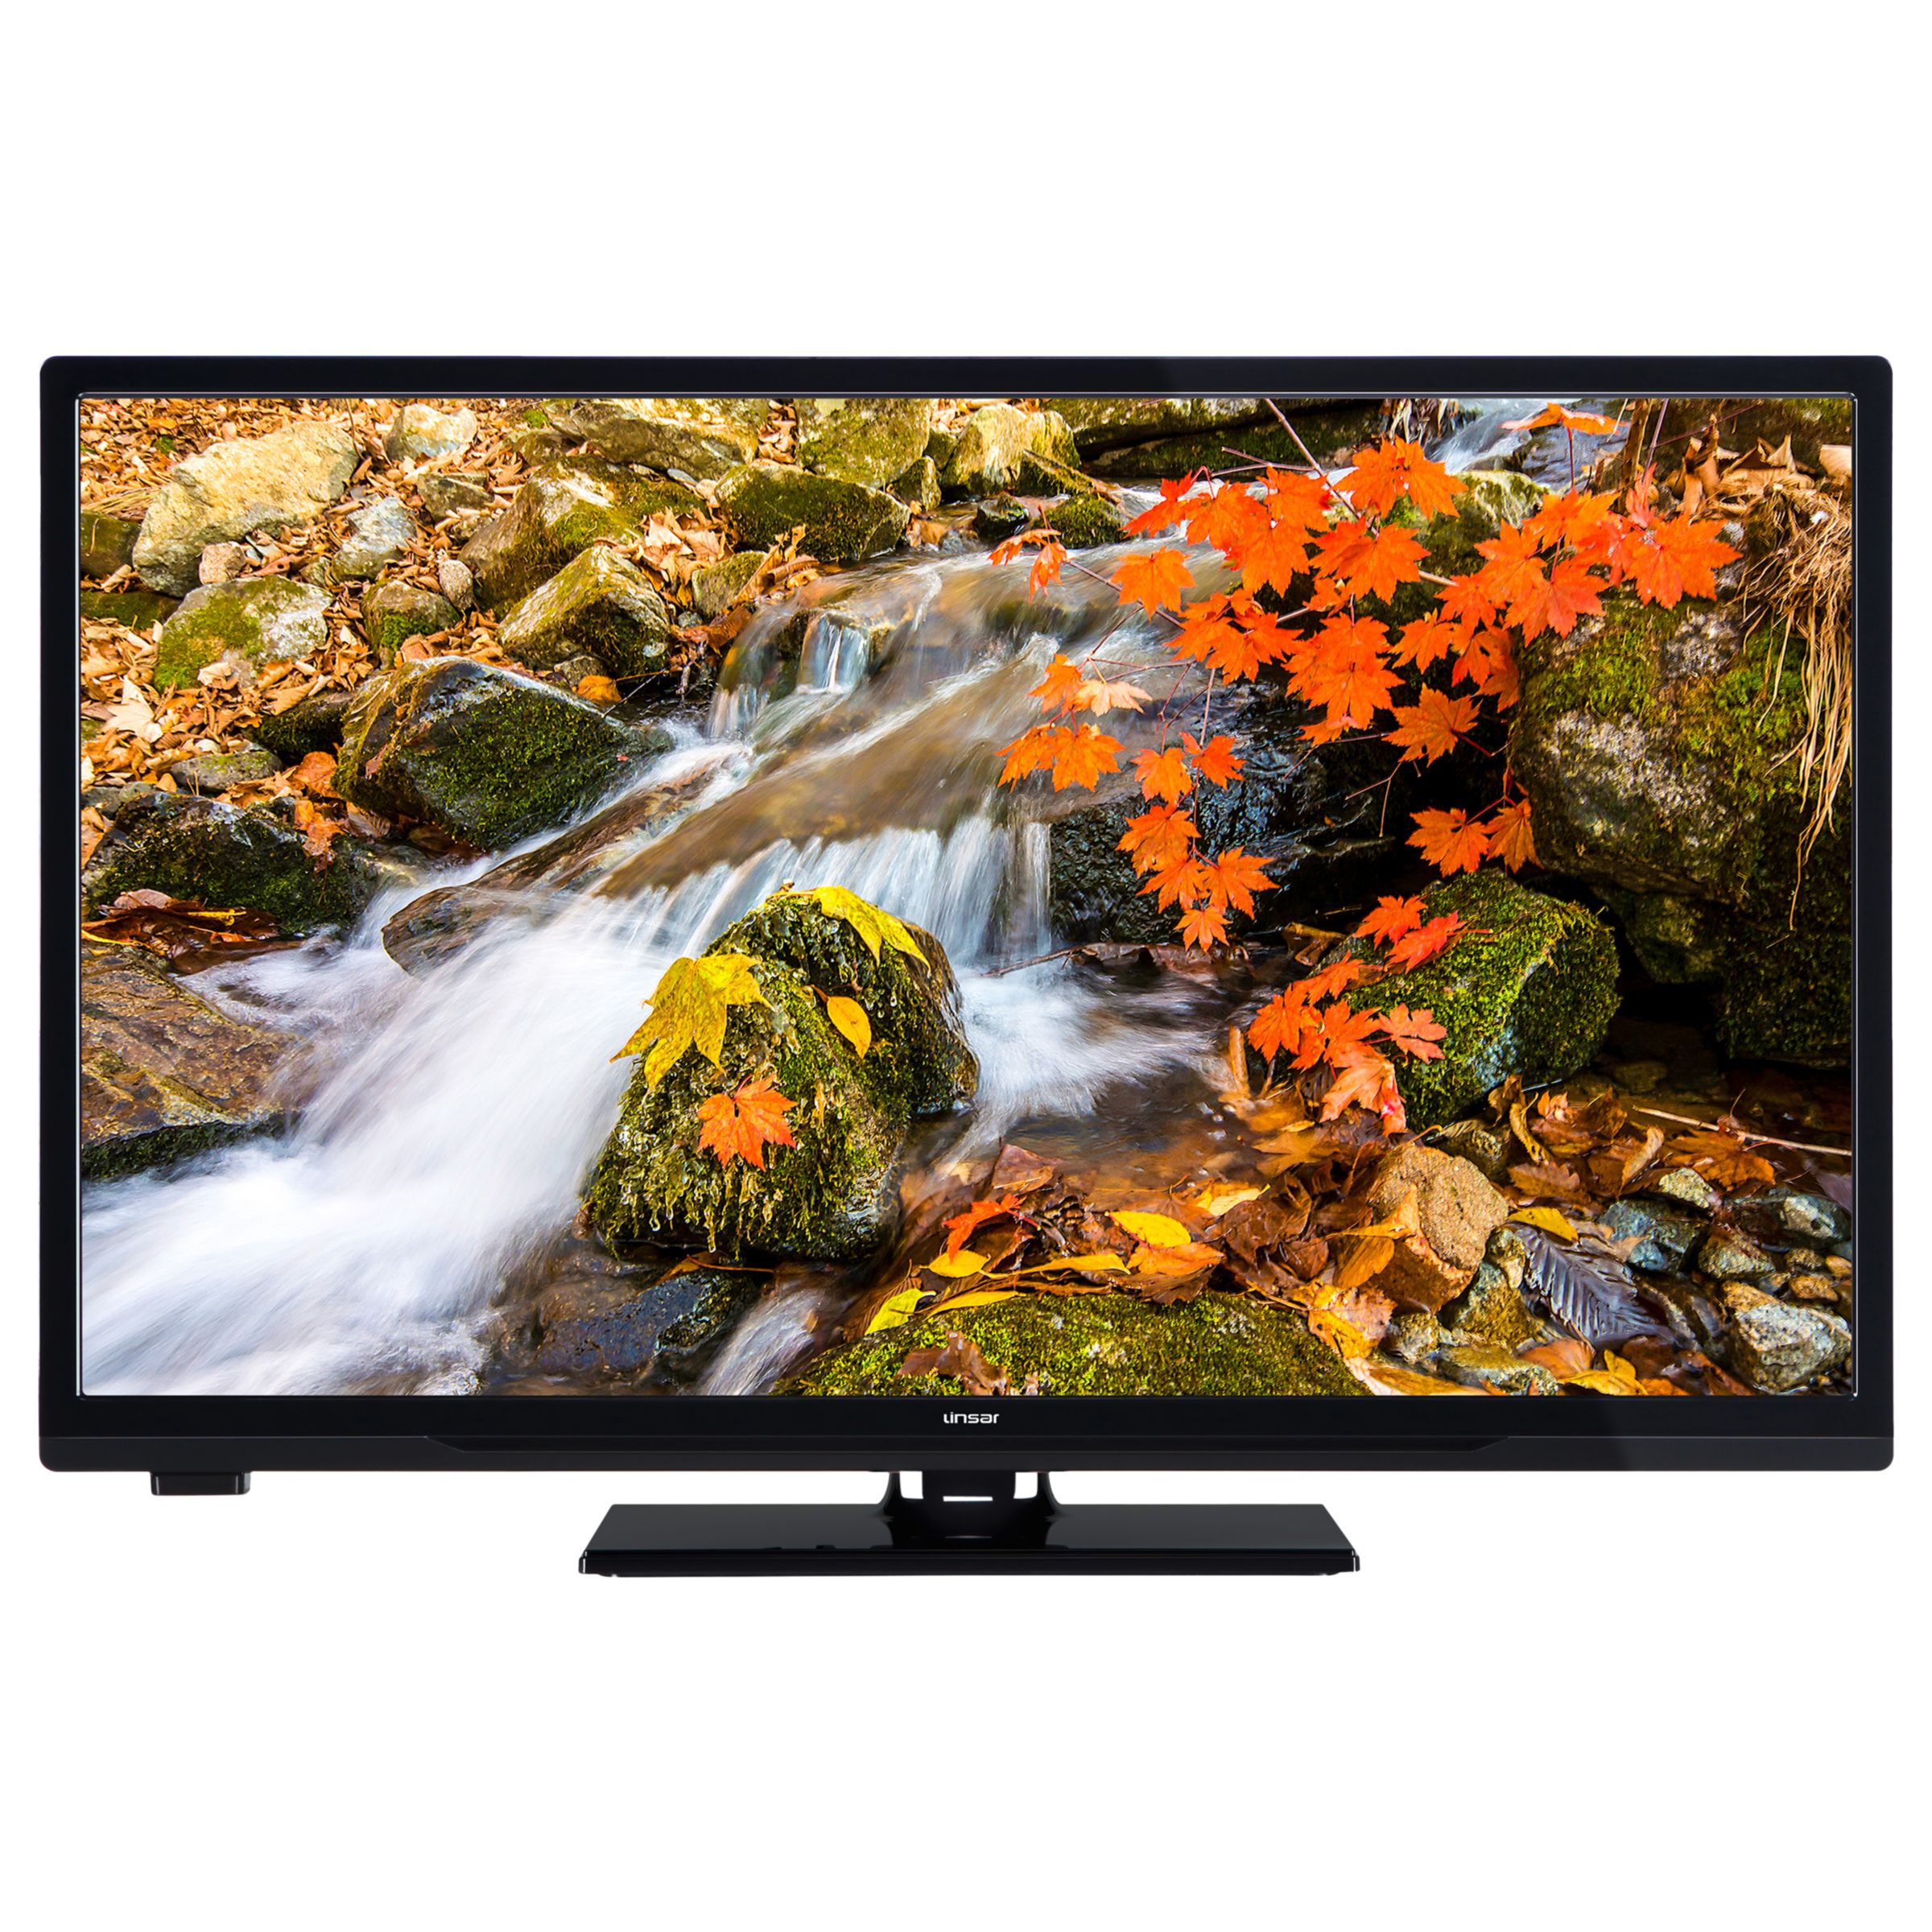 Linsar 43LED800 LED Full HD 1080p Smart TV, 43" with Built-In Wi-Fi, Freeview HD & Freeview Play, Black